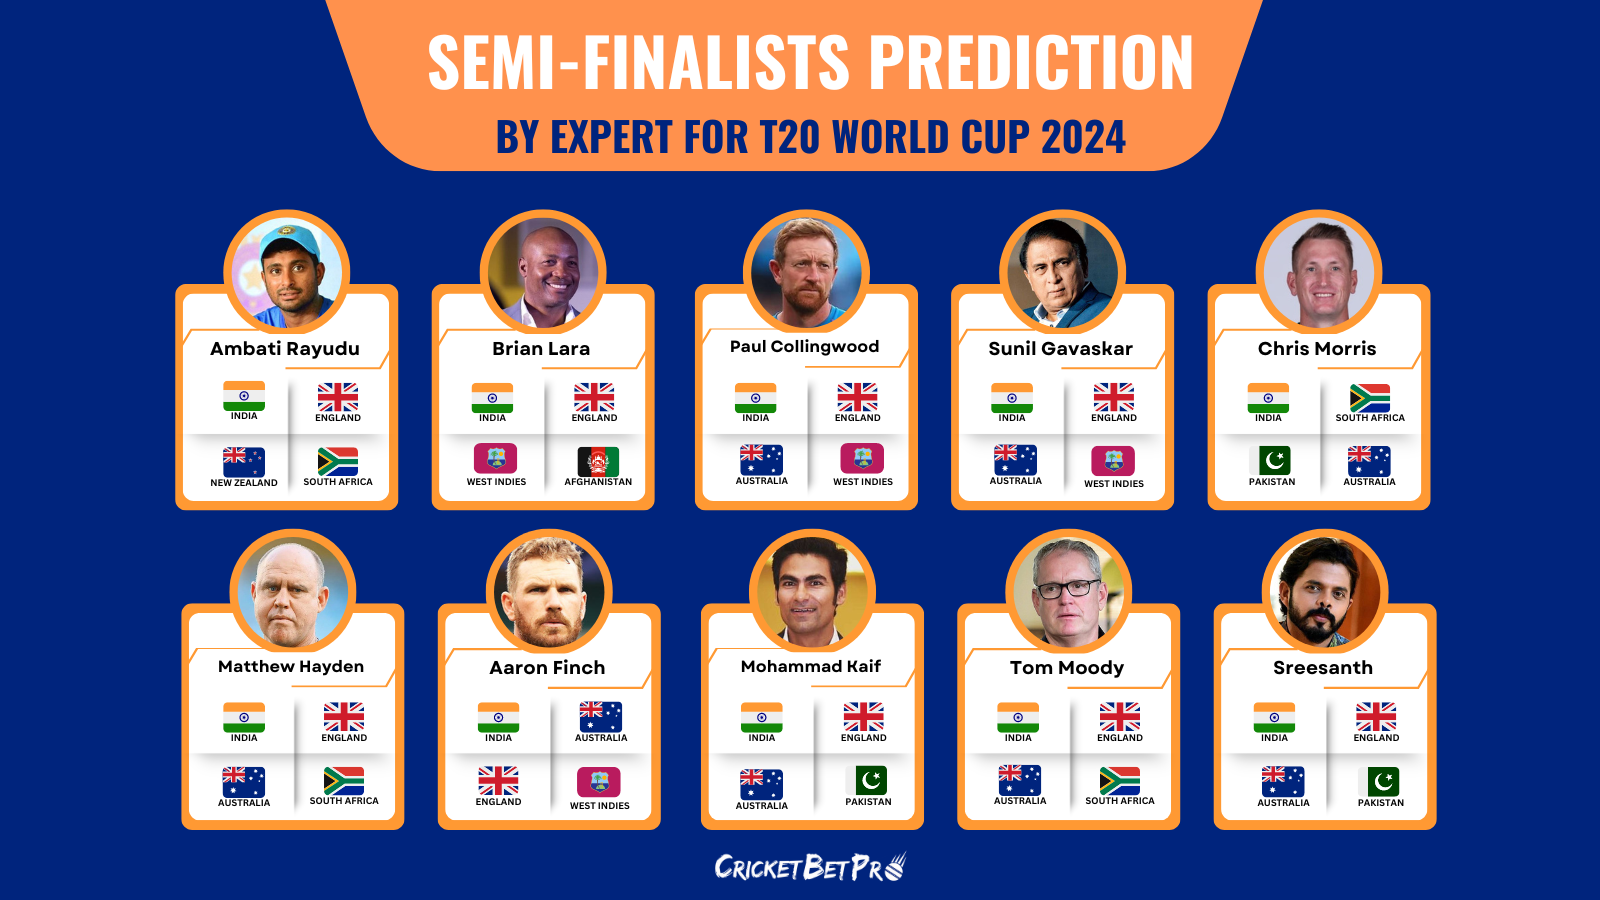 Semi-Finalists Prediction By expert for T20 World Cup 2024